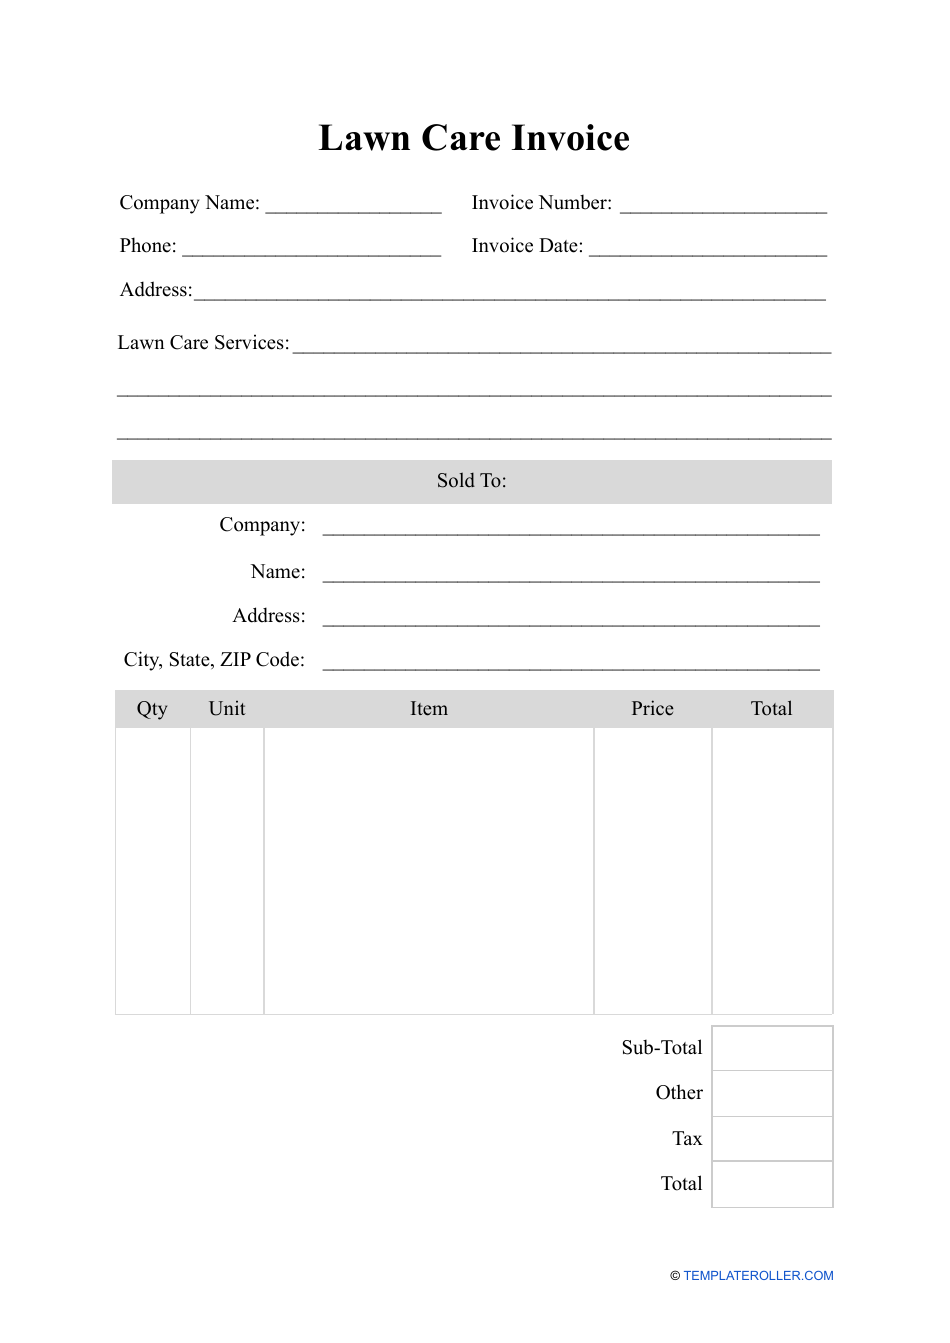 Lawn Care Invoice Template Fill Out Sign Online and Download PDF